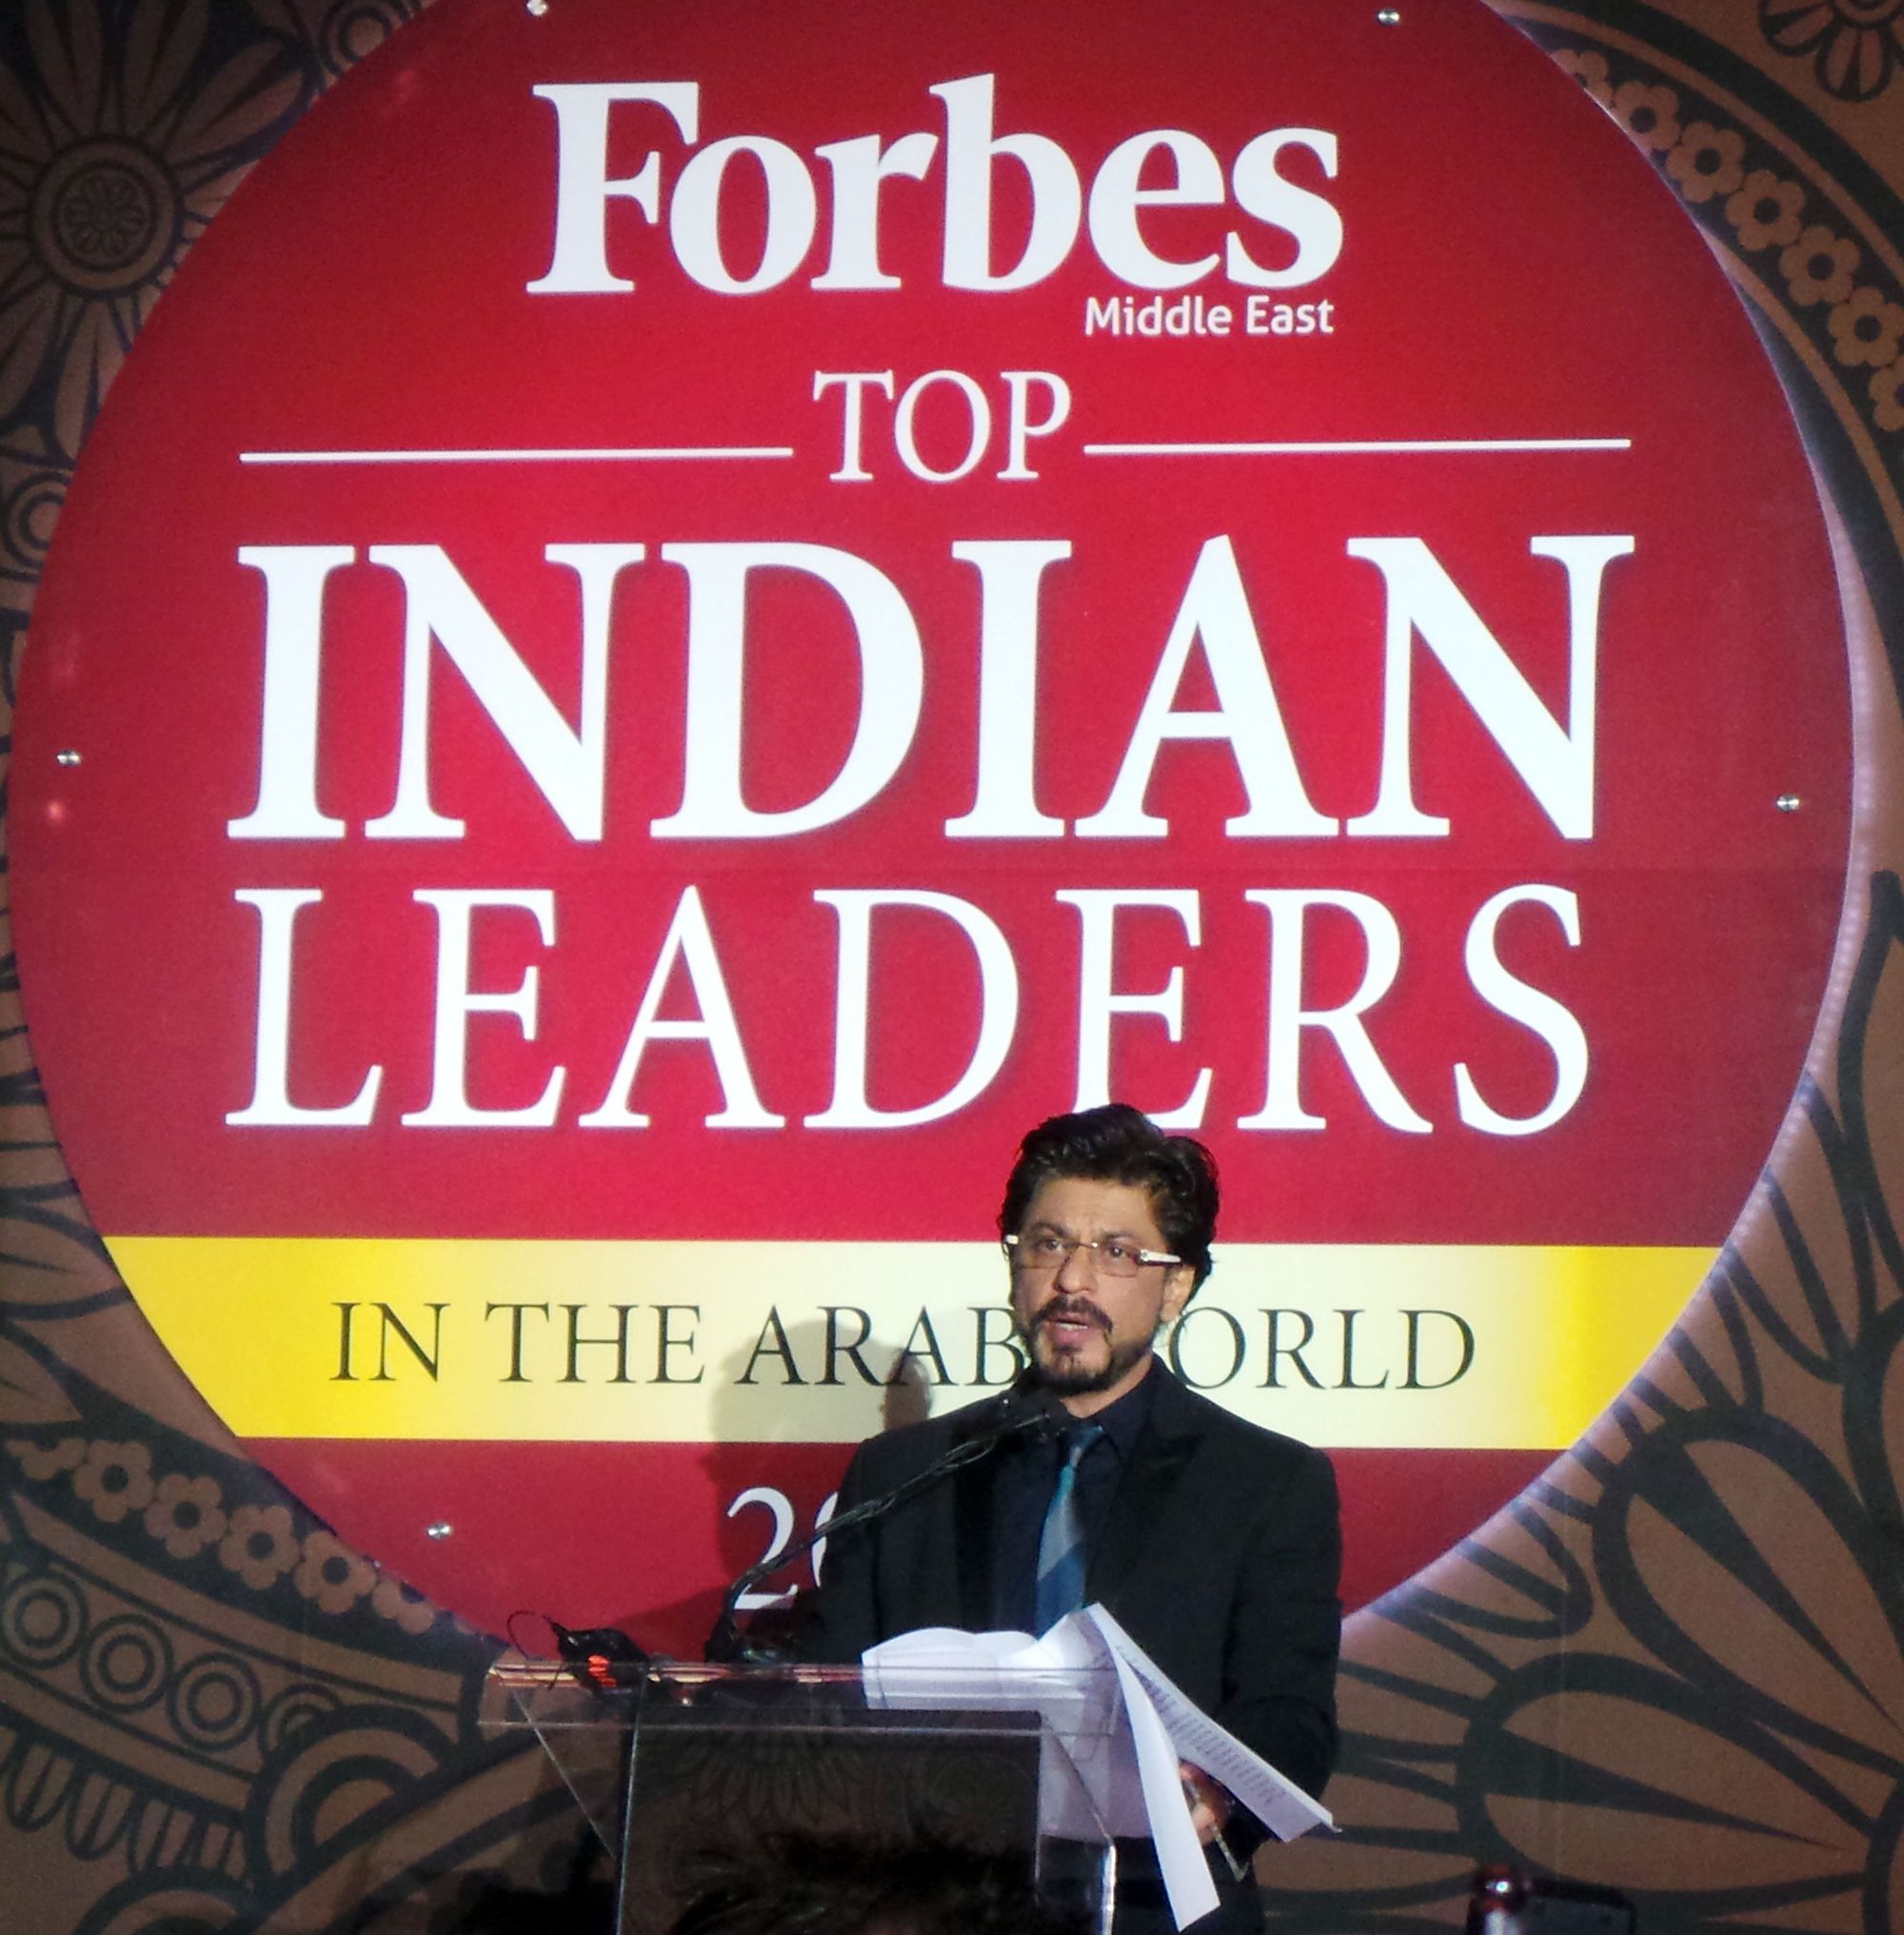 Shah Rukh Khan addressing all the Top Indian Leaders in the Arab World.